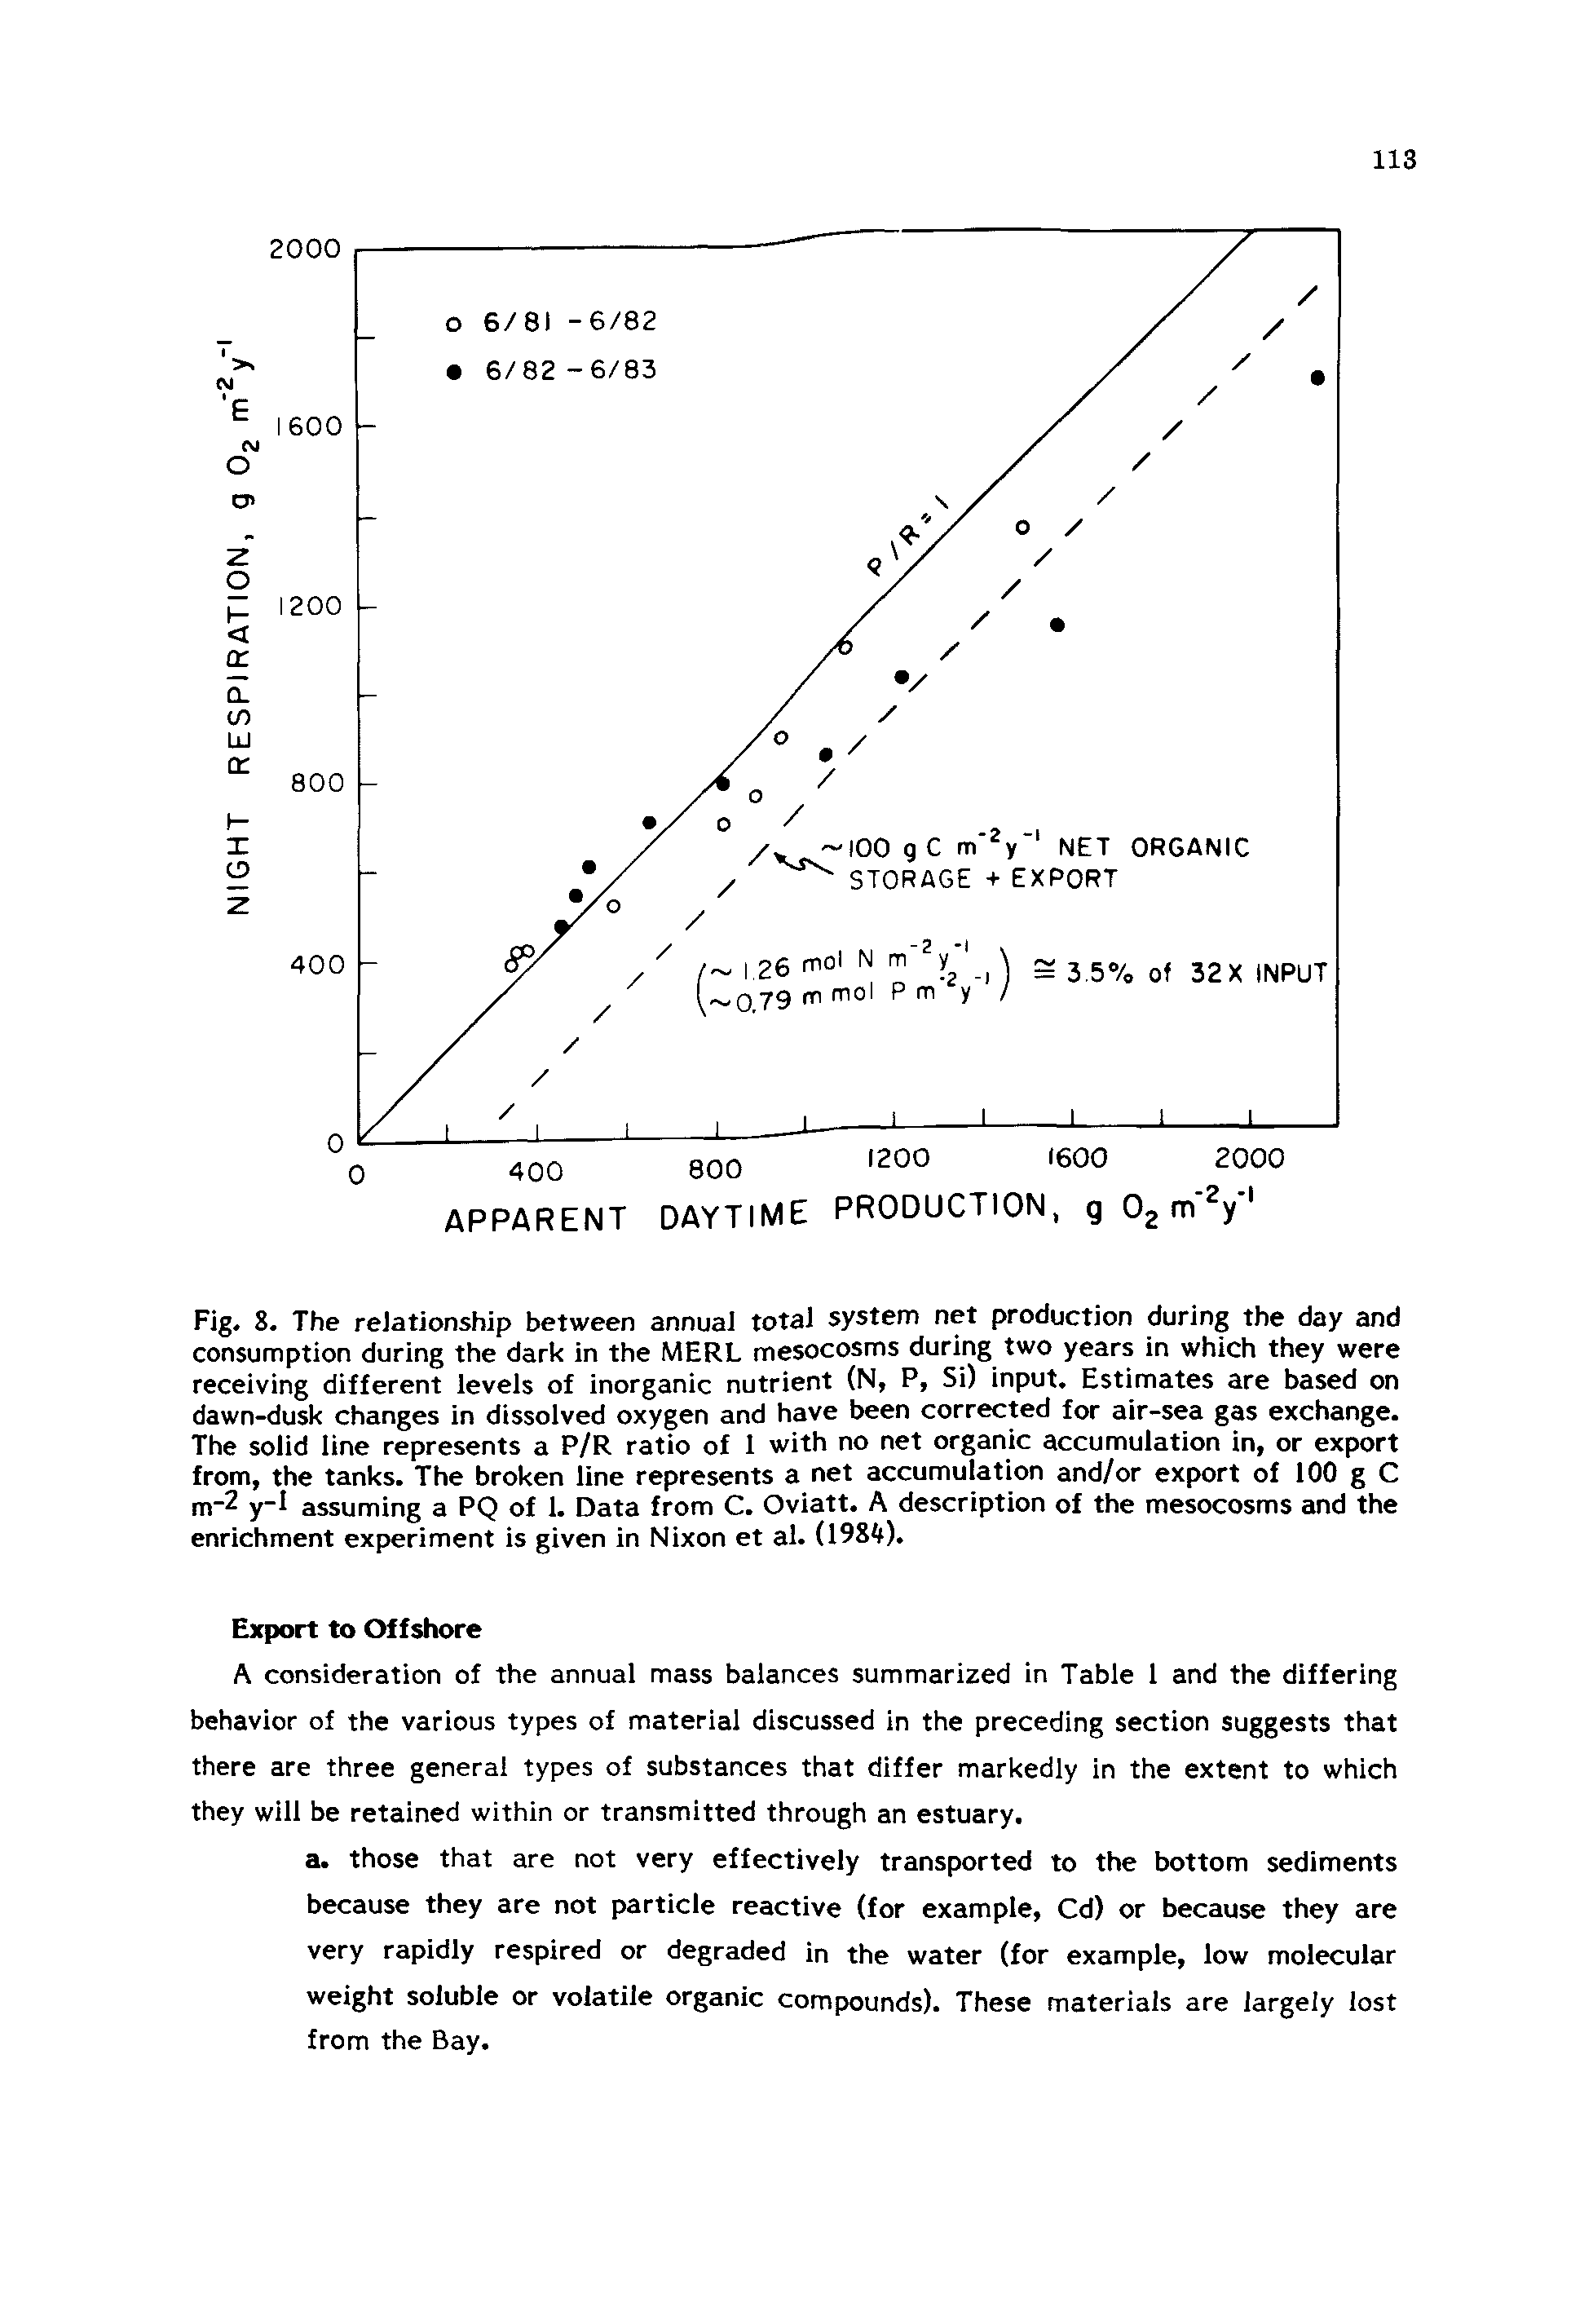 Fig. 8. The relationship between annual total system net production during the day and consumption during the dark in the MERL mesocosms during two years in which they were receiving different levels of inorganic nutrient (N, P, Si) input. Estimates are based on dawn-dusk changes in dissolved oxygen and have been corrected for air-sea gas exchange. The solid line represents a P/R ratio of 1 with no net organic accumulation in, or export from, the tanks. The broken line represents a net accumulation and/or export of 100 g C m-2 y-1 assuming a PQ of 1. Data from C. Oviatt. A description of the mesocosms and the enrichment experiment is given in Nixon et al. (198 ).